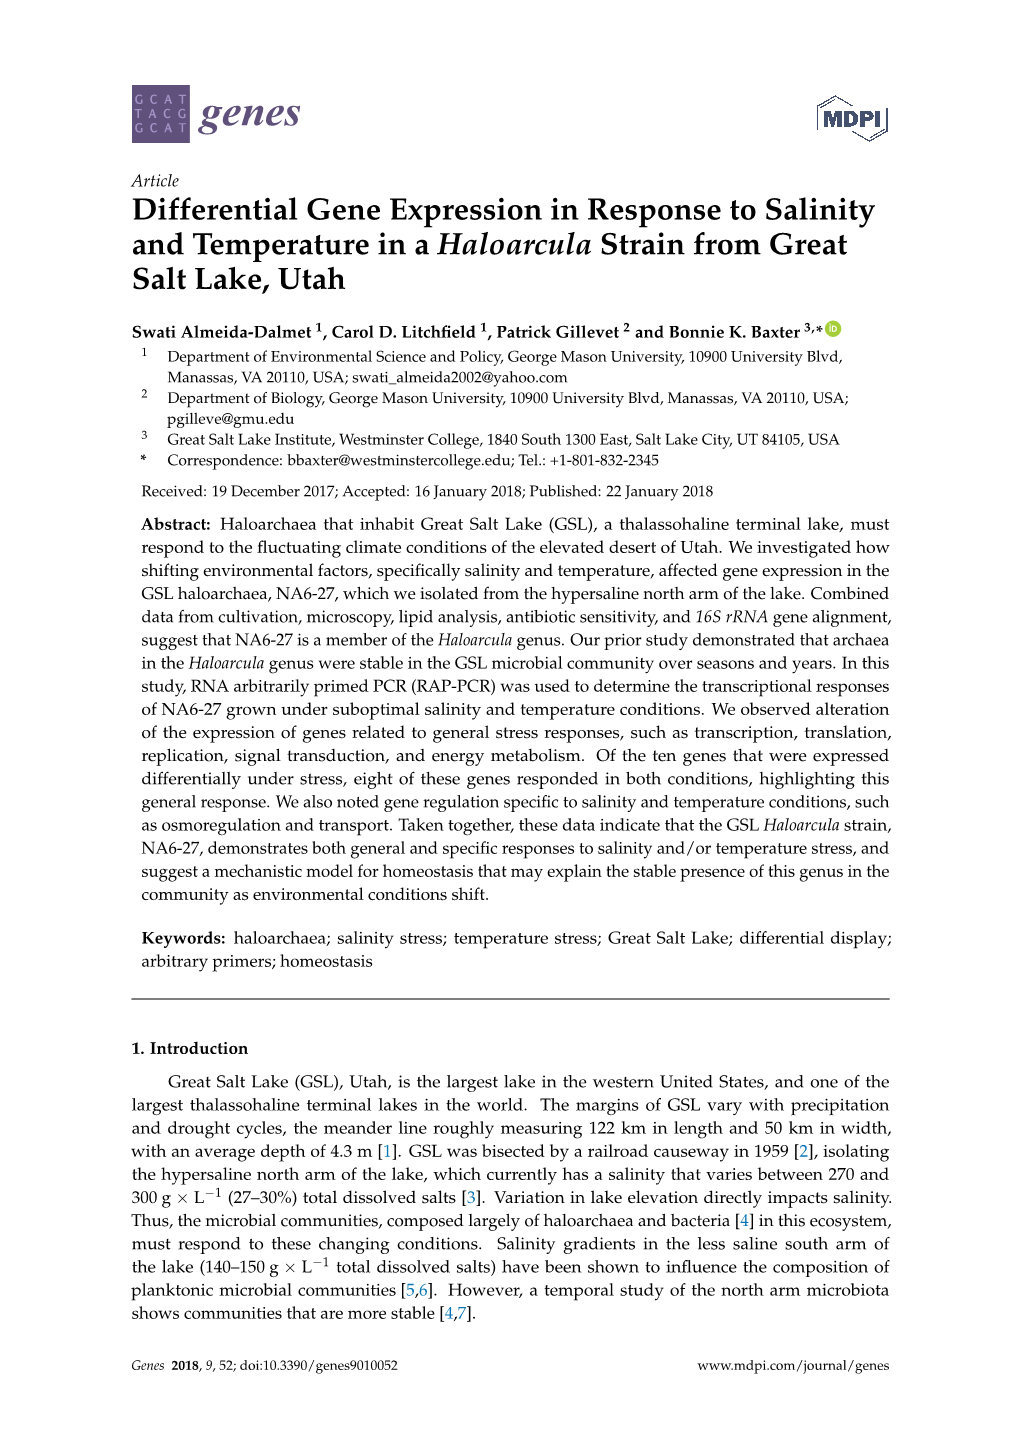 Differential Gene Expression in Response to Salinity and Temperature in a Haloarcula Strain from Great Salt Lake, Utah